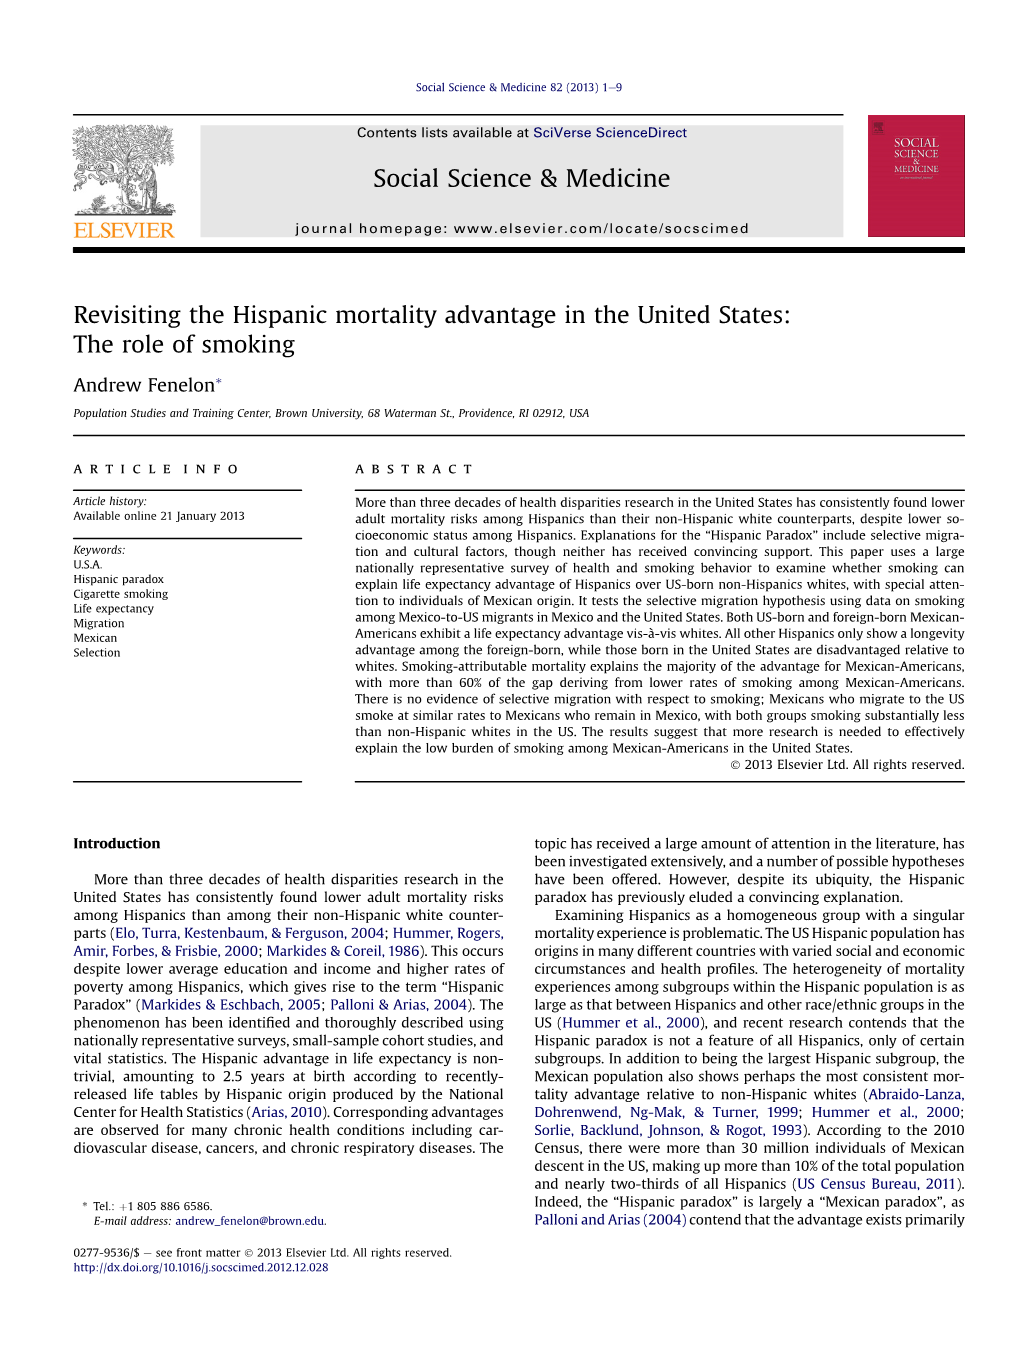 Revisiting the Hispanic Mortality Advantage in the United States: the Role of Smoking